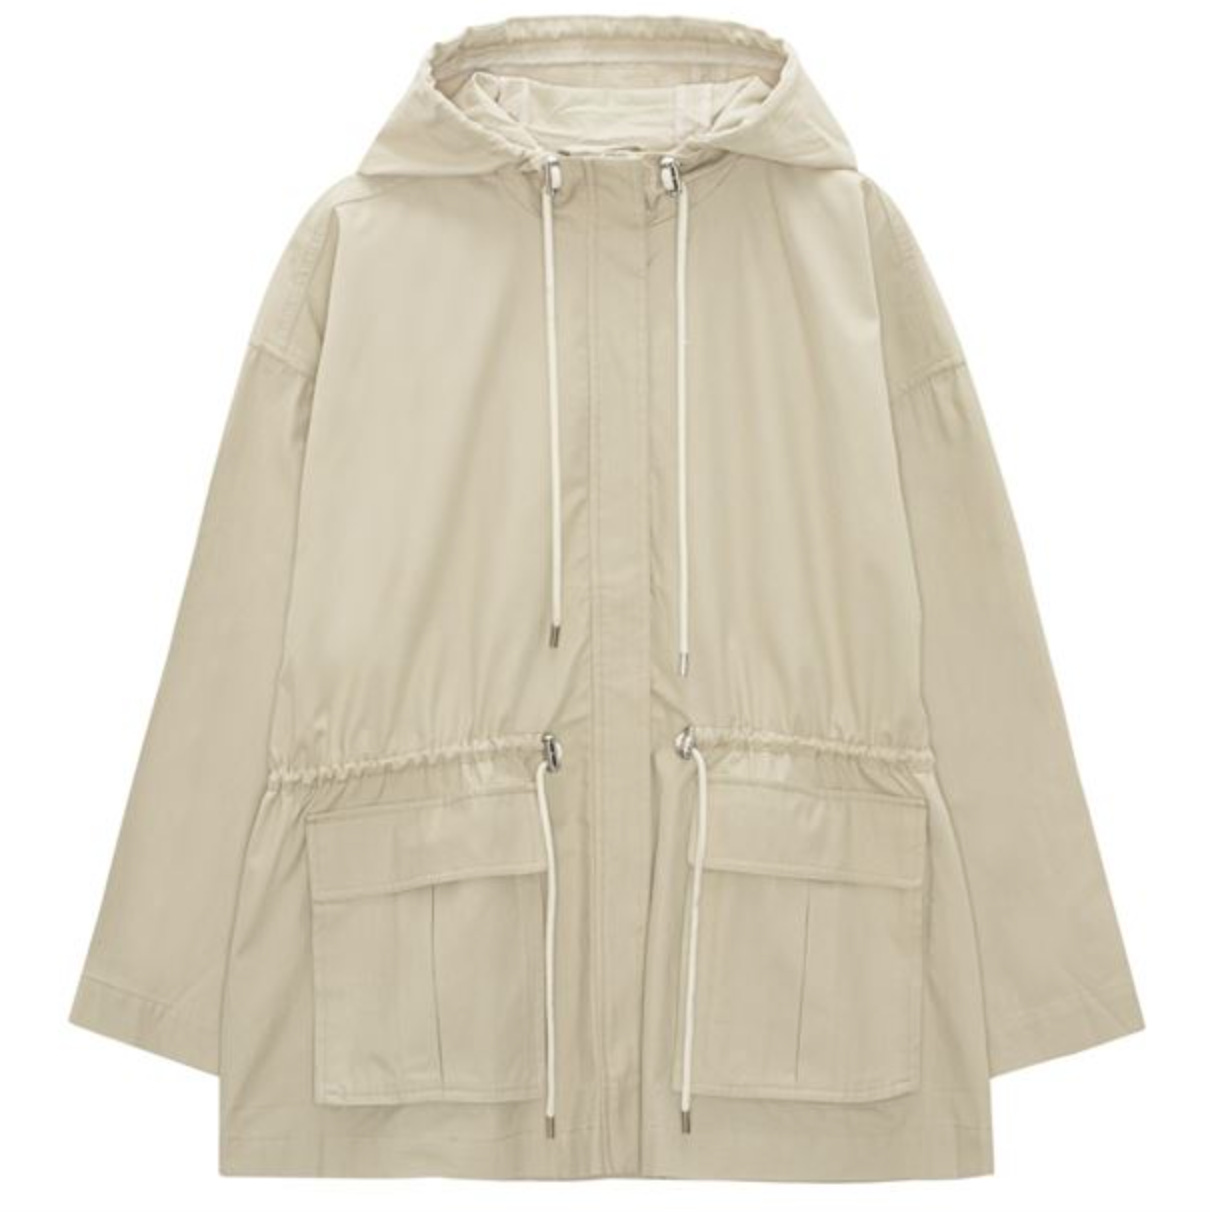 The best spring coat is a shell parka